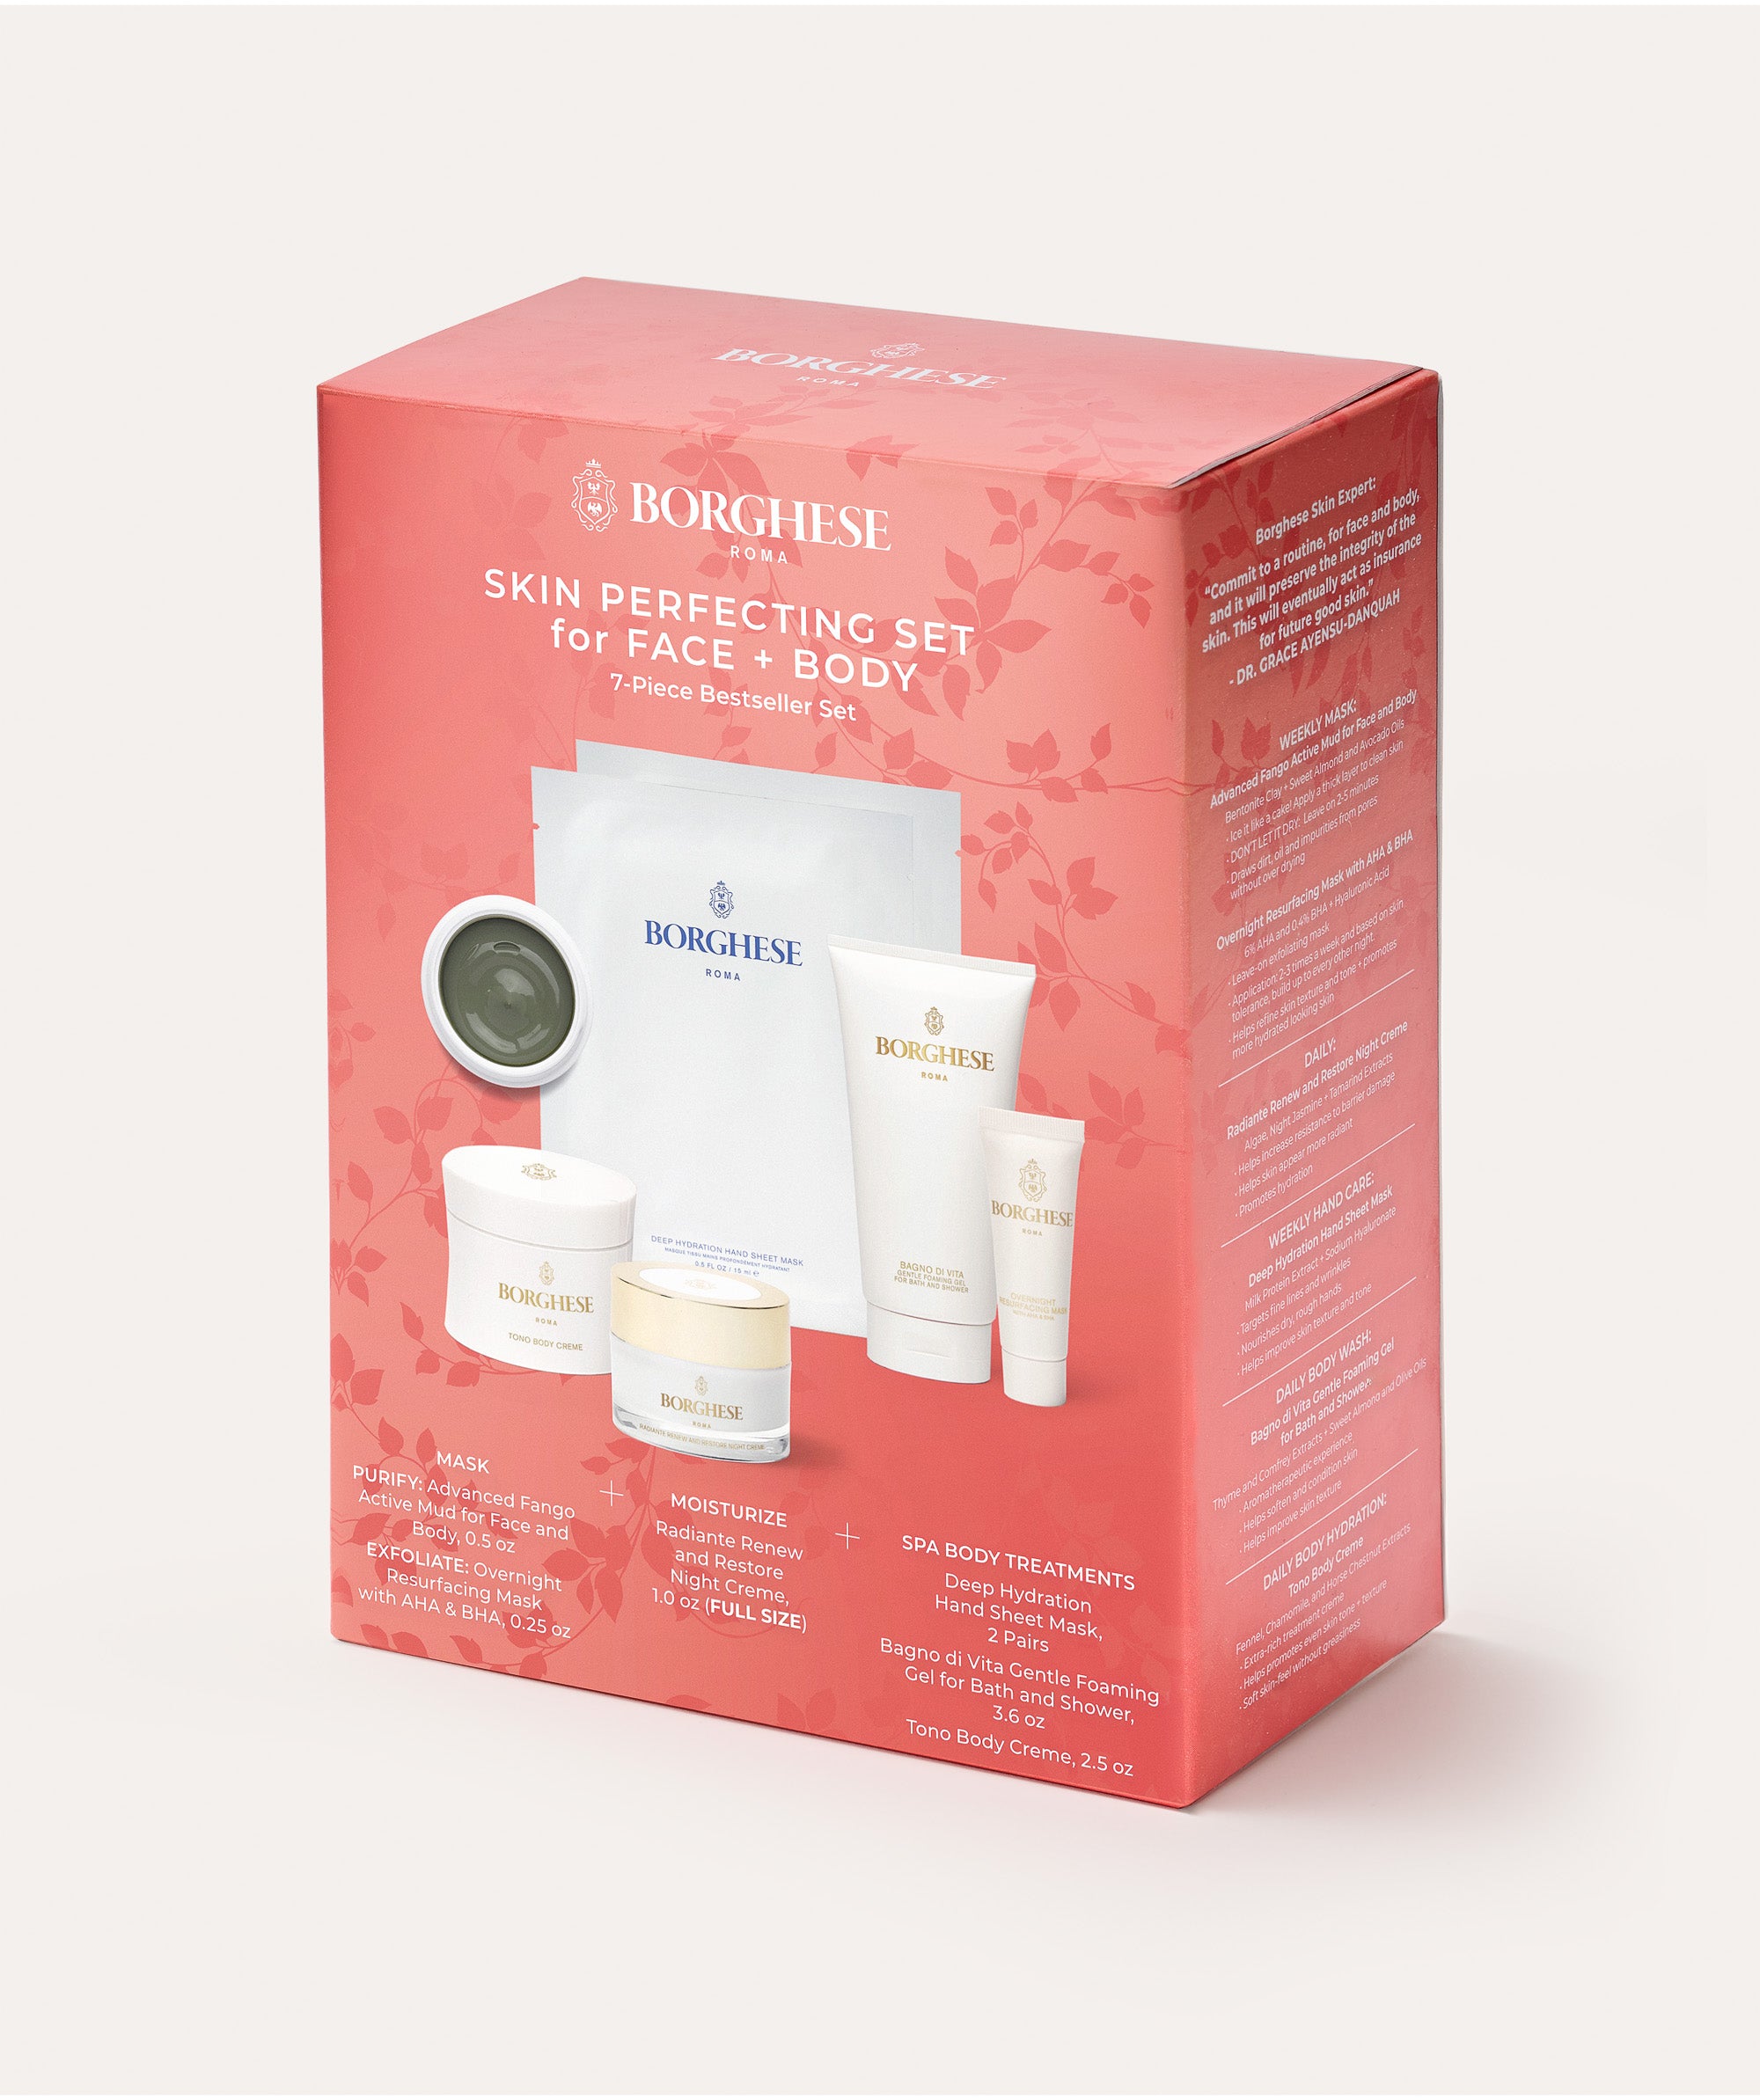 The Borghese Roma 7-Piece Skin Perfecting Gift Set box